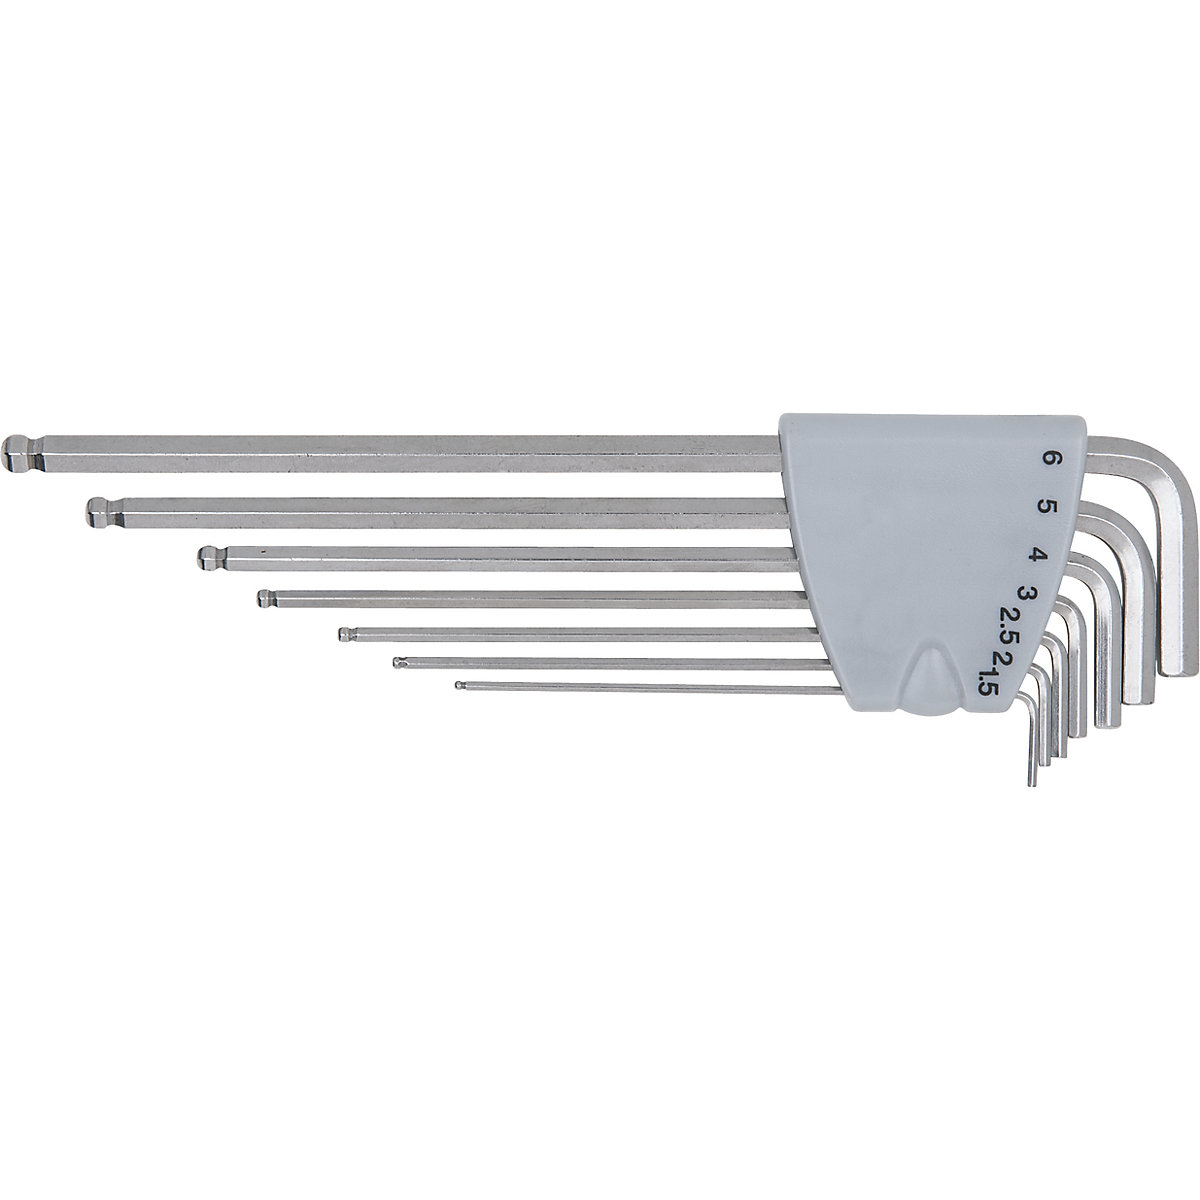 Stainless steel angle key wrench set, XL – KS Tools